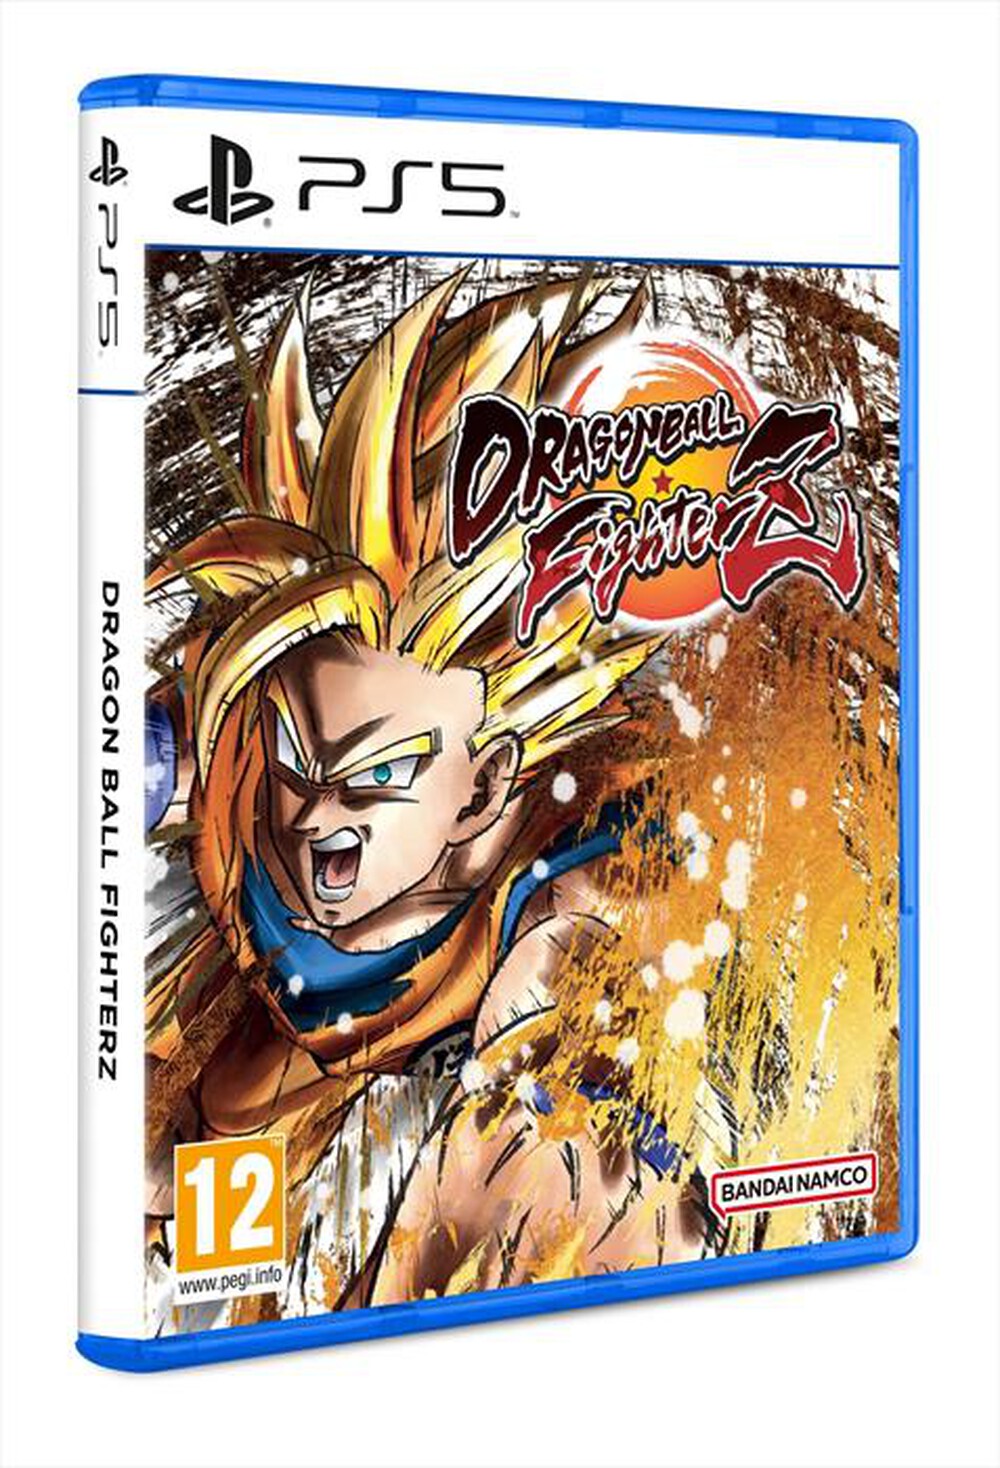 "NAMCO - DRAGON BALL FIGHTERZ PS5"